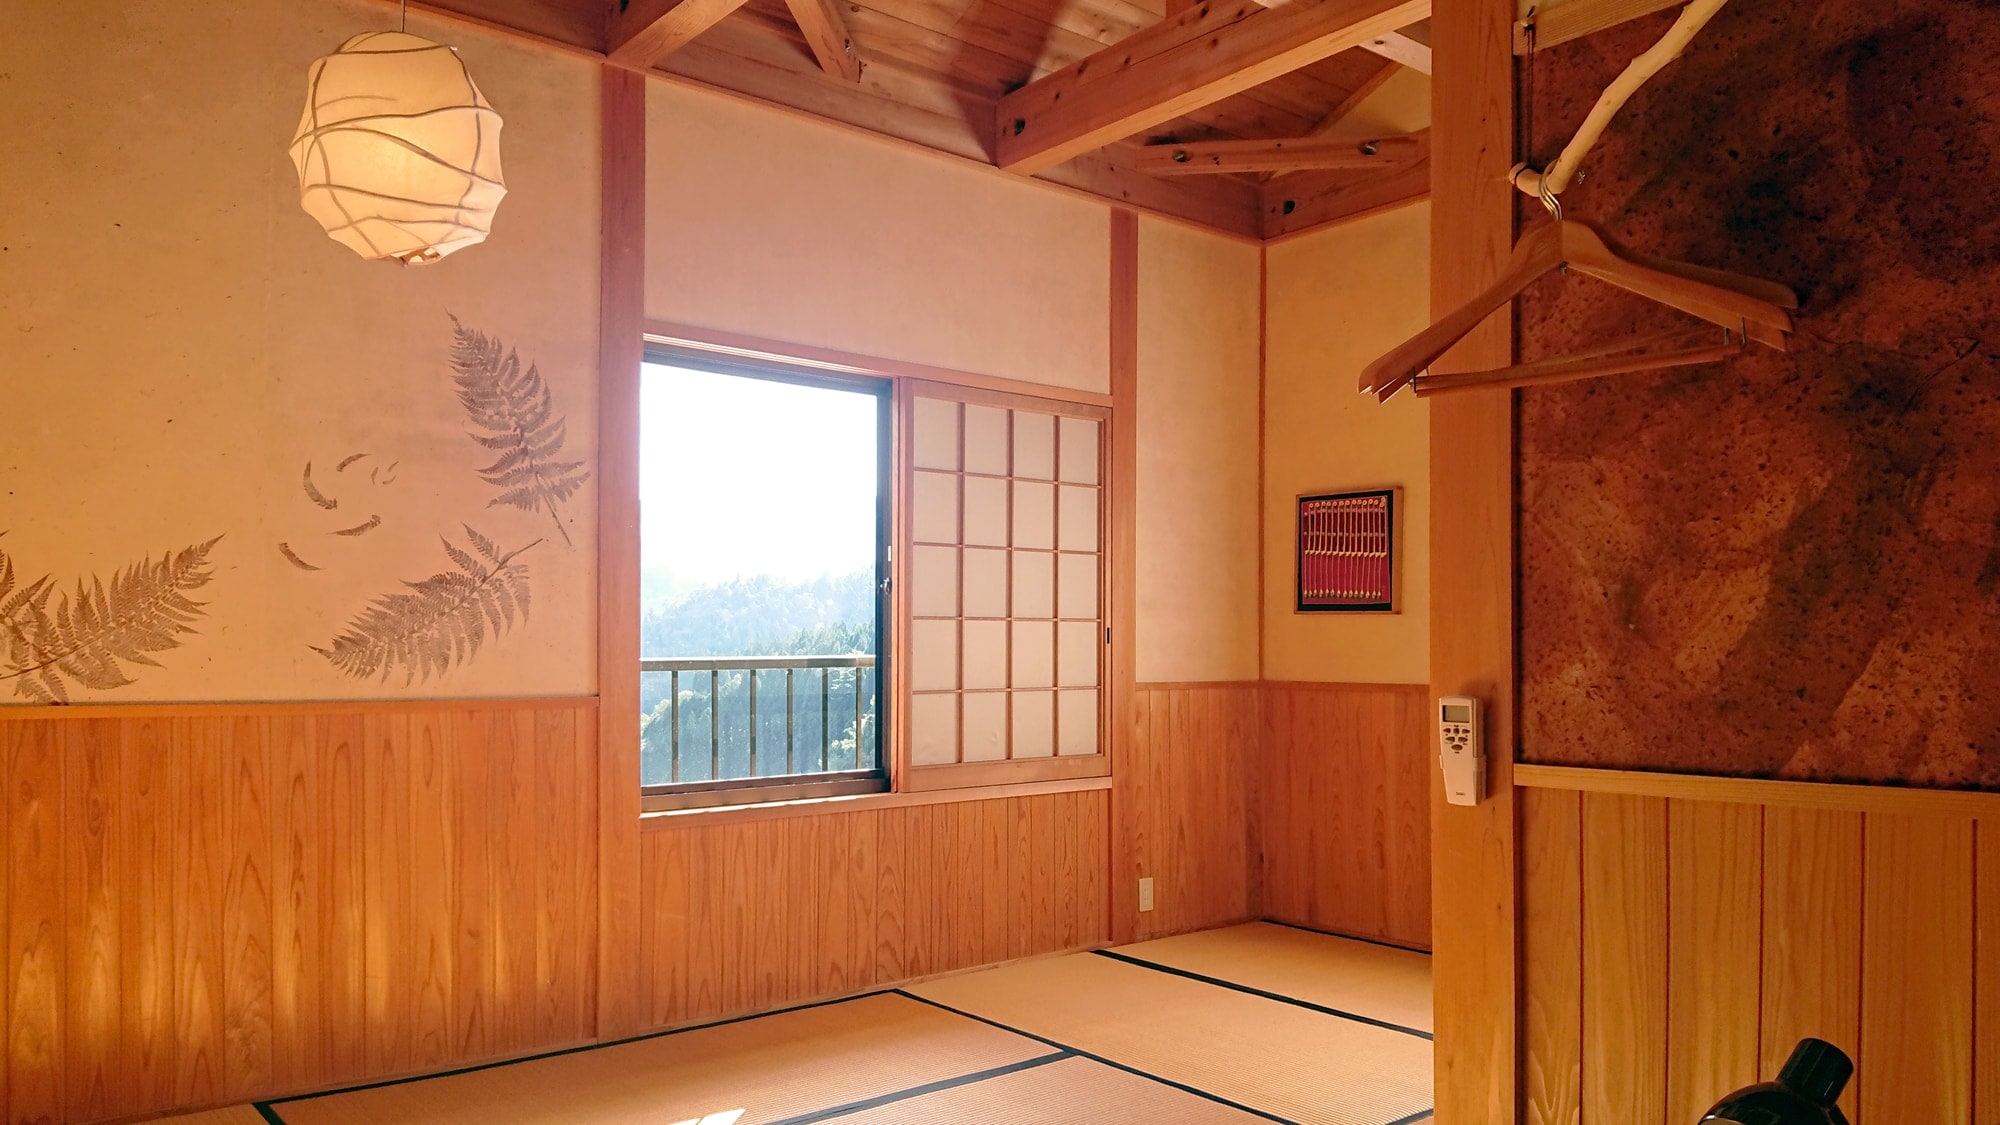 [Guest room] Japanese-style room with 8 tatami mats. The calm decoration is a paper craft interior.